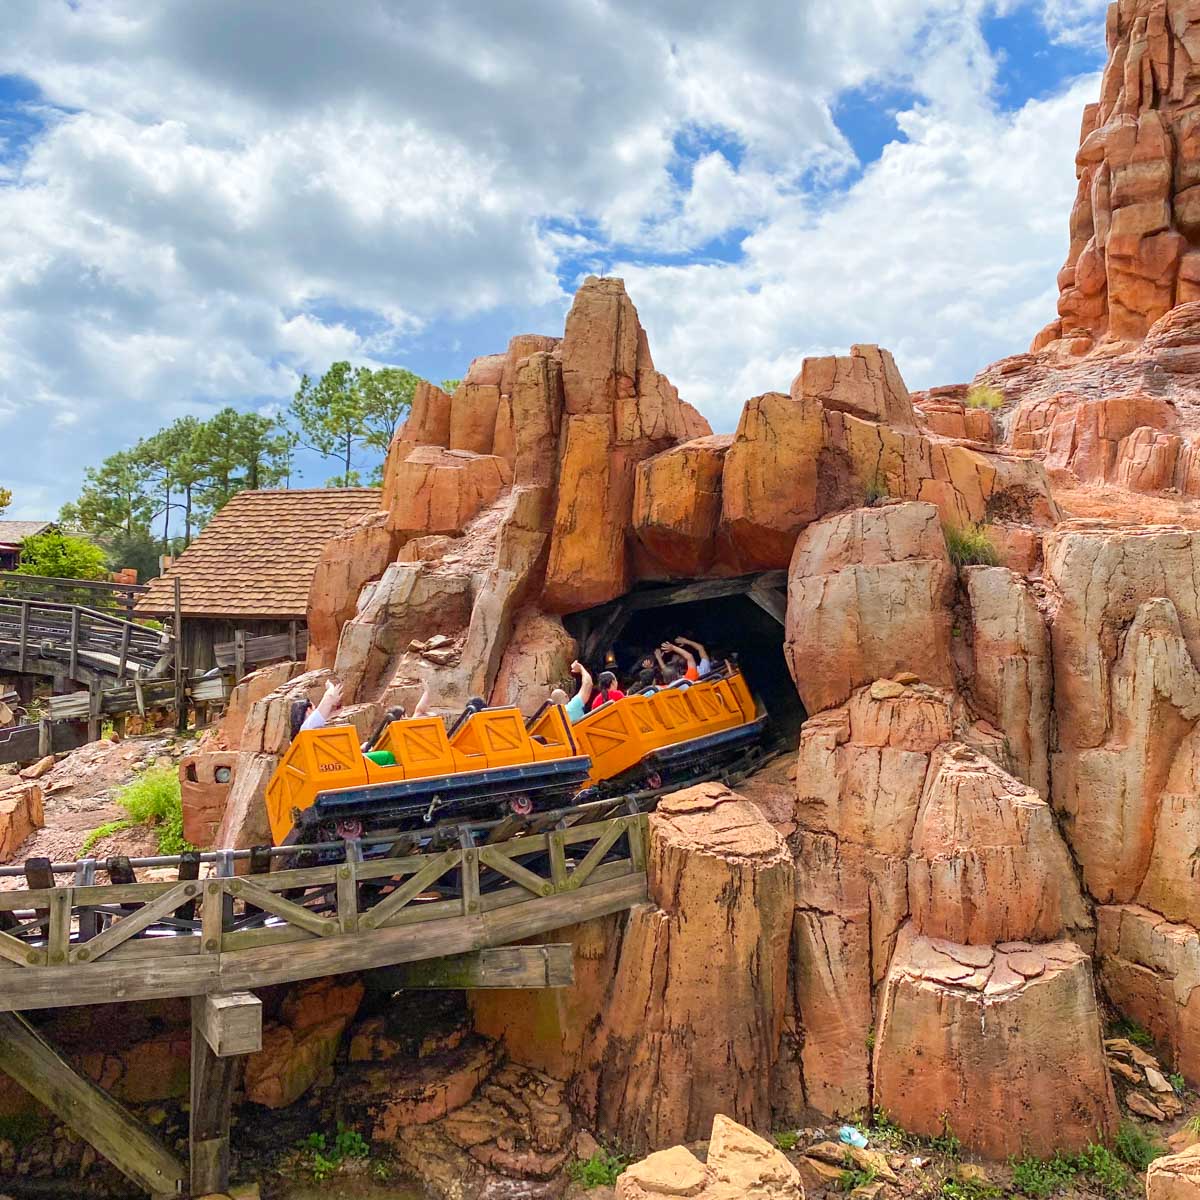 A roller coaster disappears into a cave in a mountainside on Big Thunder Railroad in Magic Kingdom.